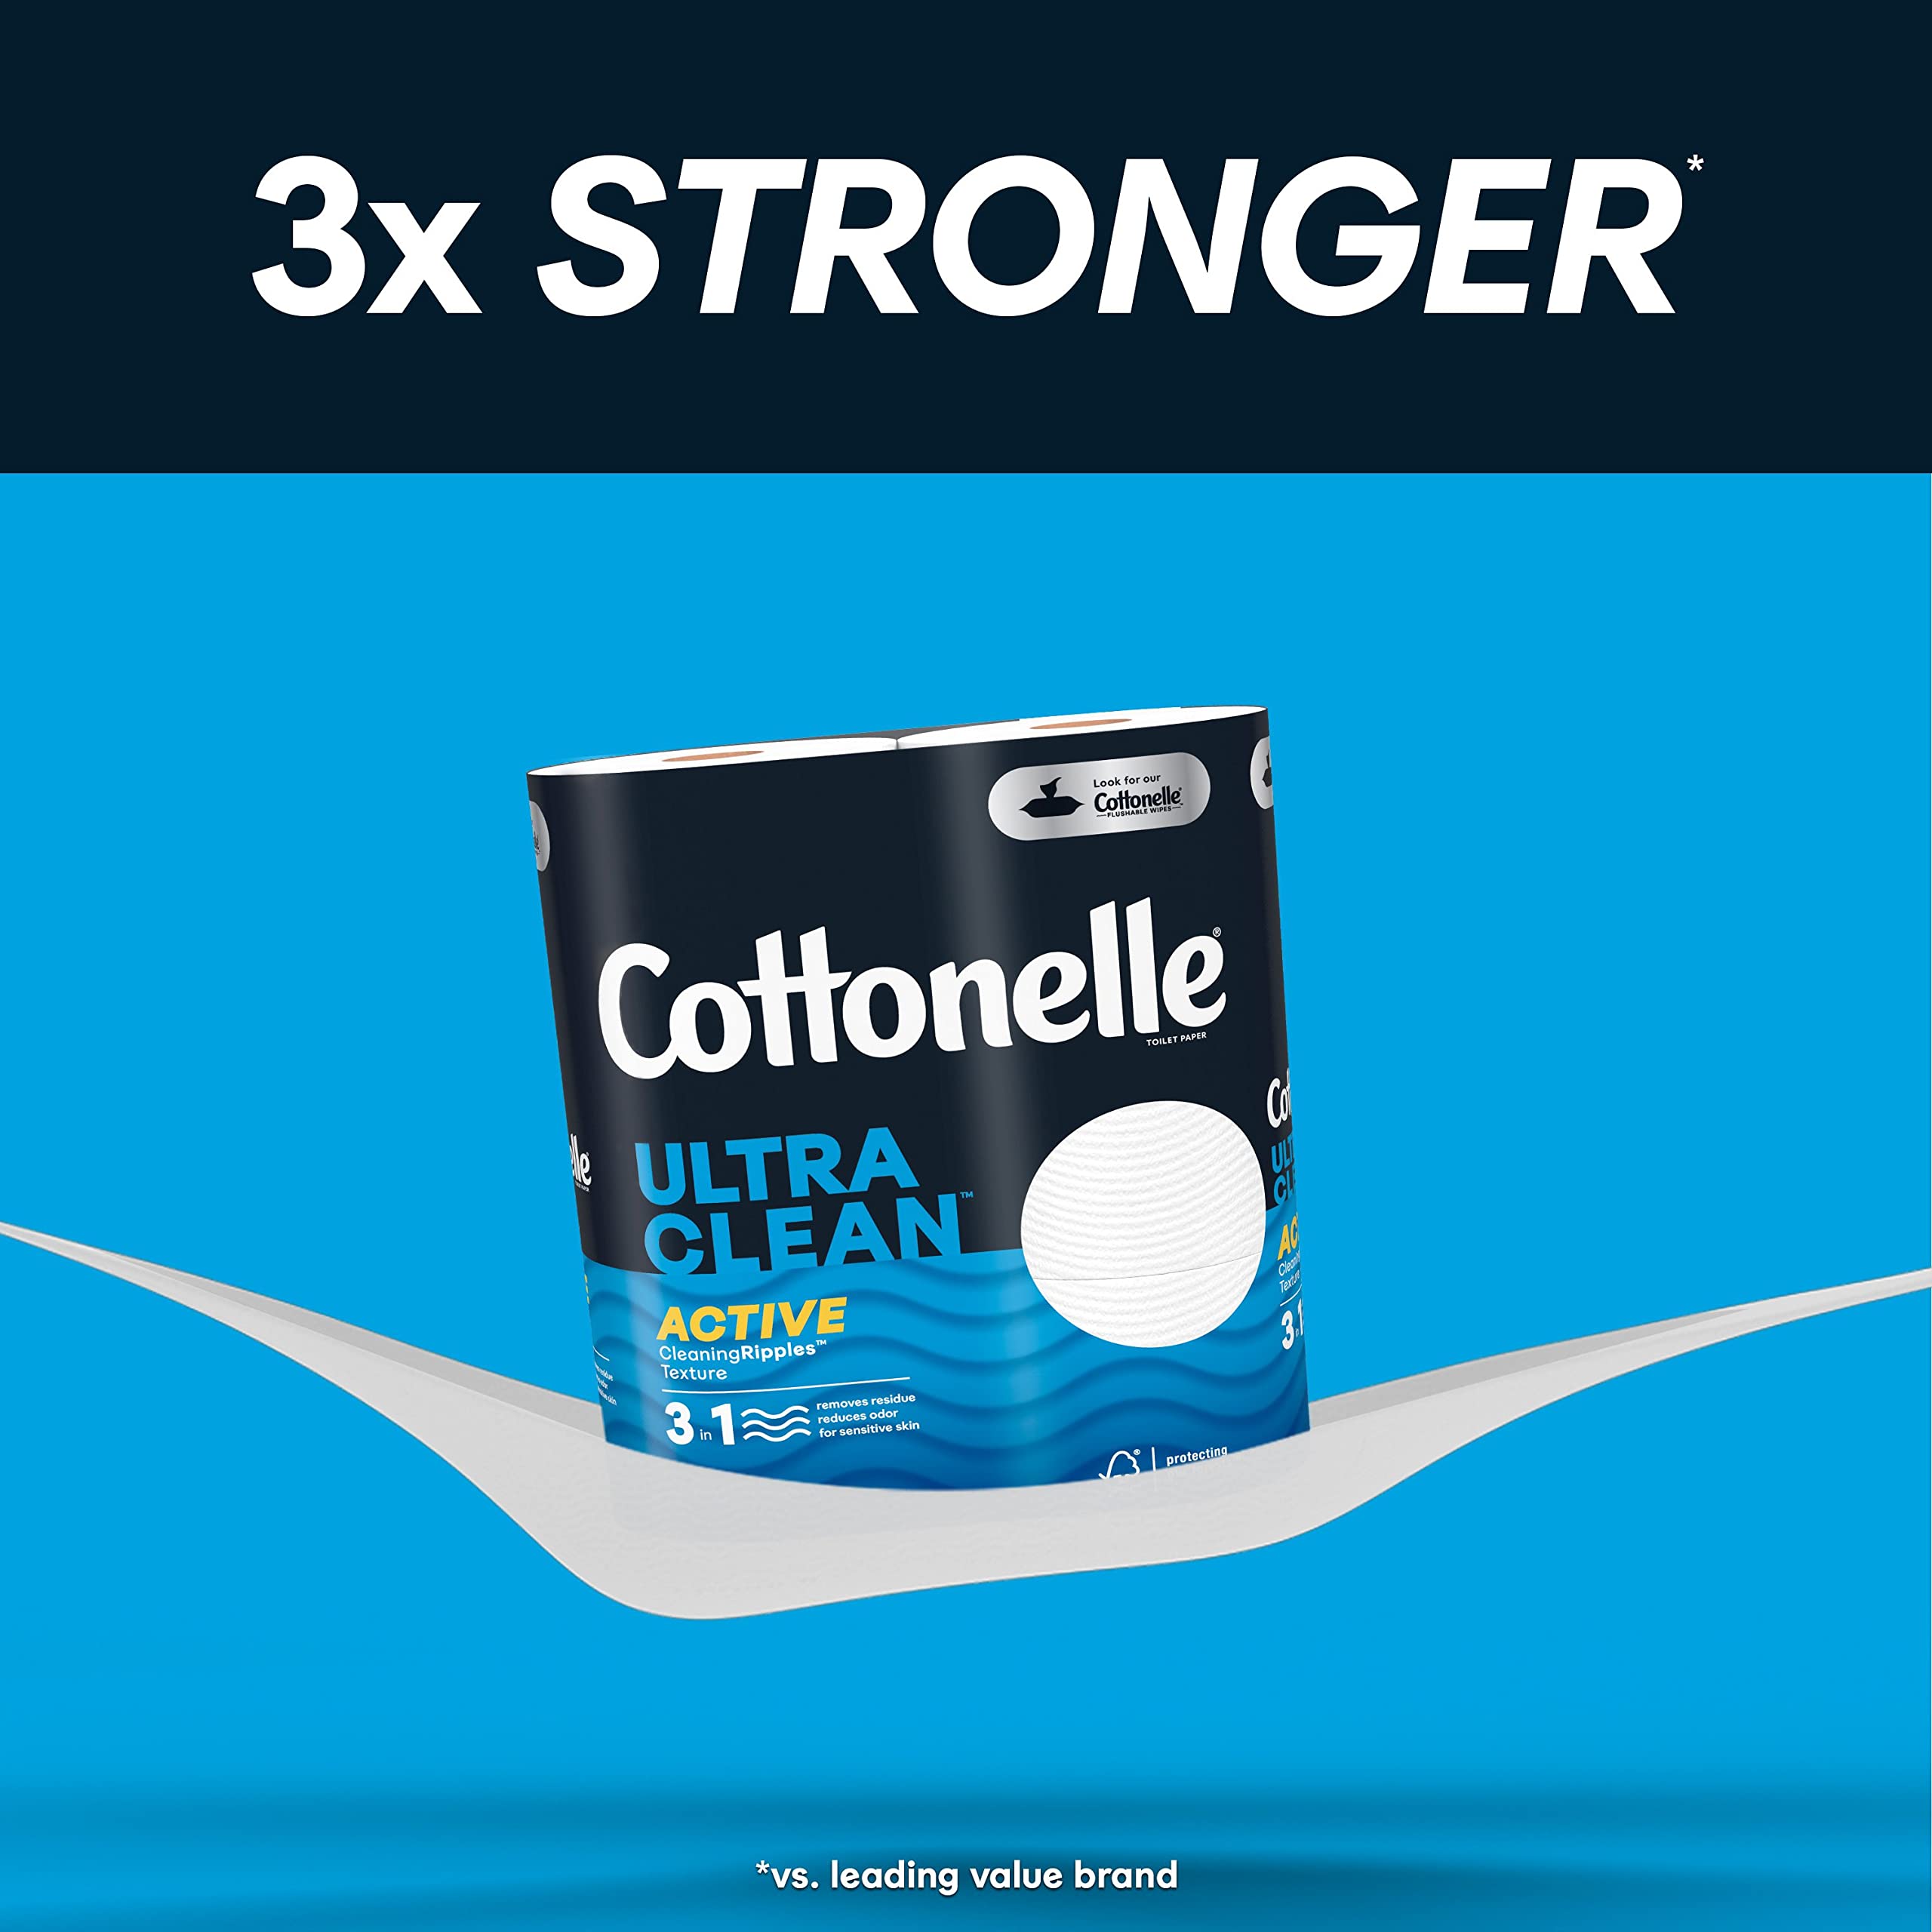 Cottonelle Ultra Clean Toilet Paper with Active CleaningRipples Texture, Strong Bath Tissue, 32 Family Mega Rolls (32 Family Mega Rolls = 176 Regular Rolls) (8 Packs of 4), 388 Sheets per Roll